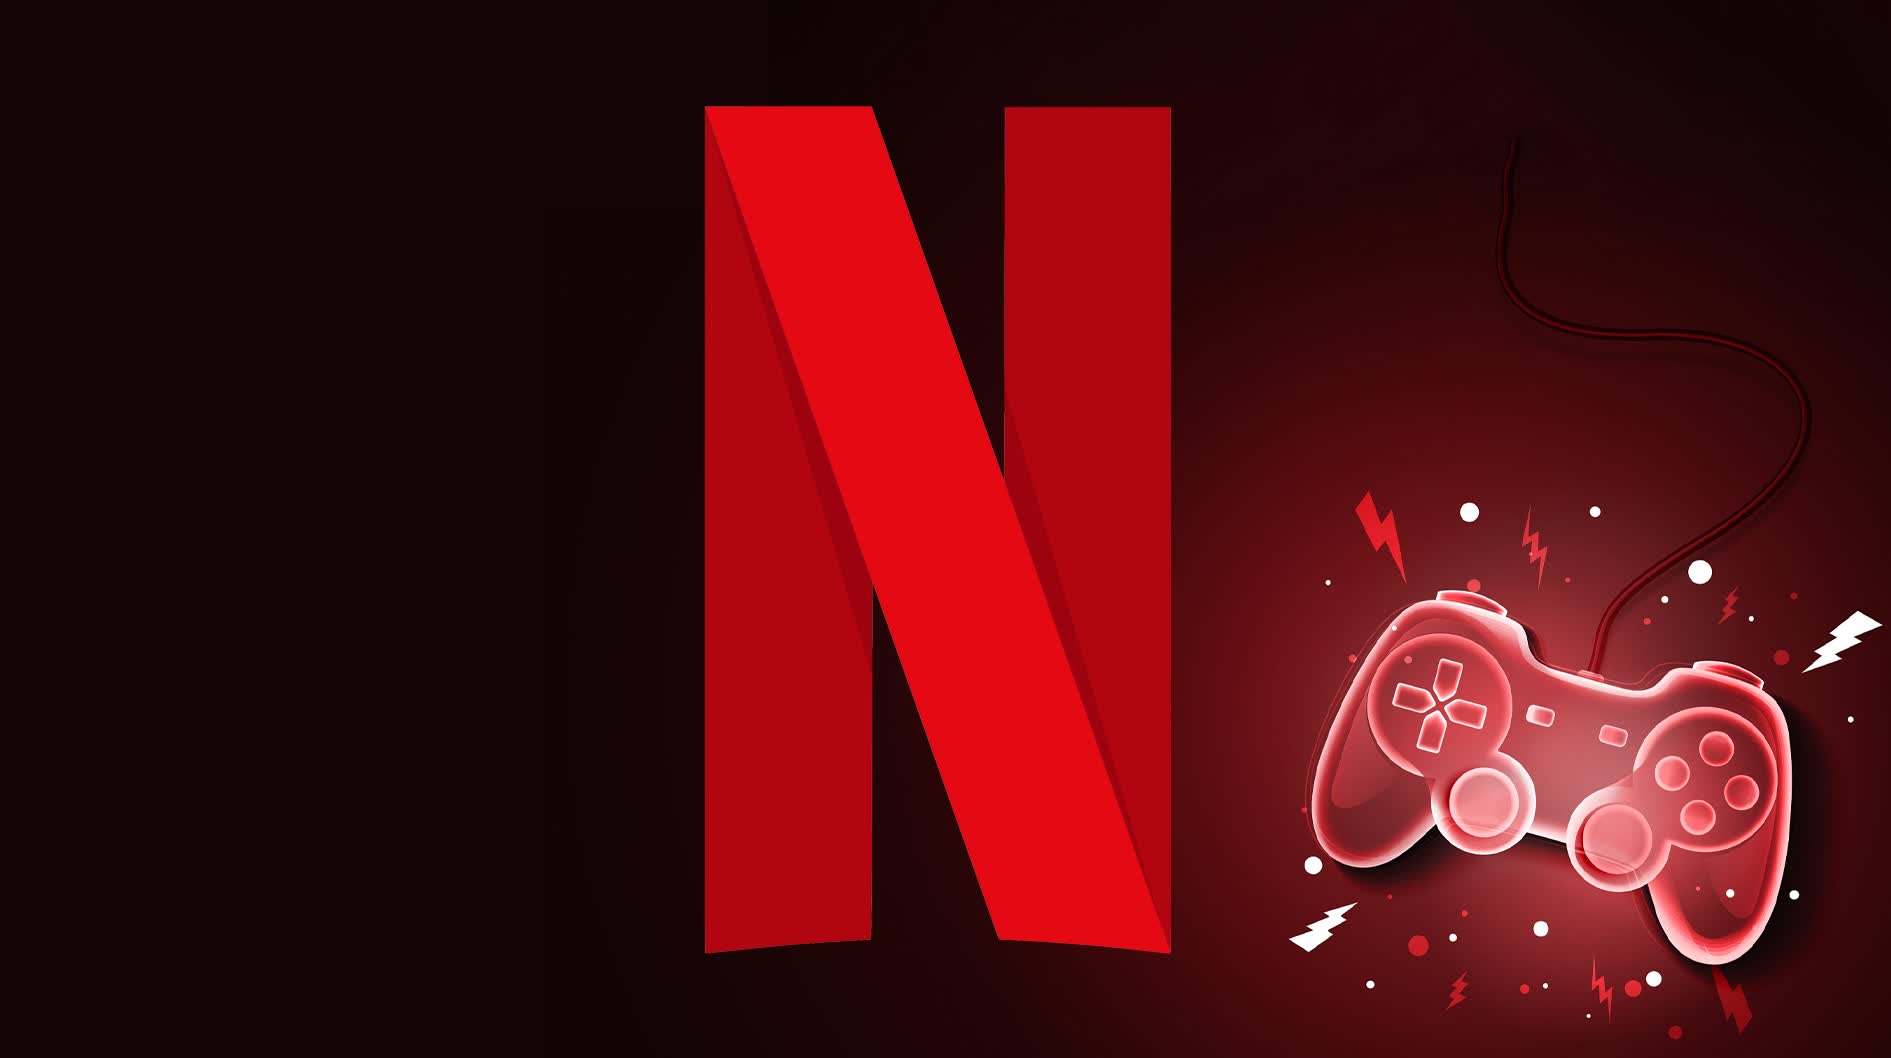 Netflix is building its own game studio in Finland